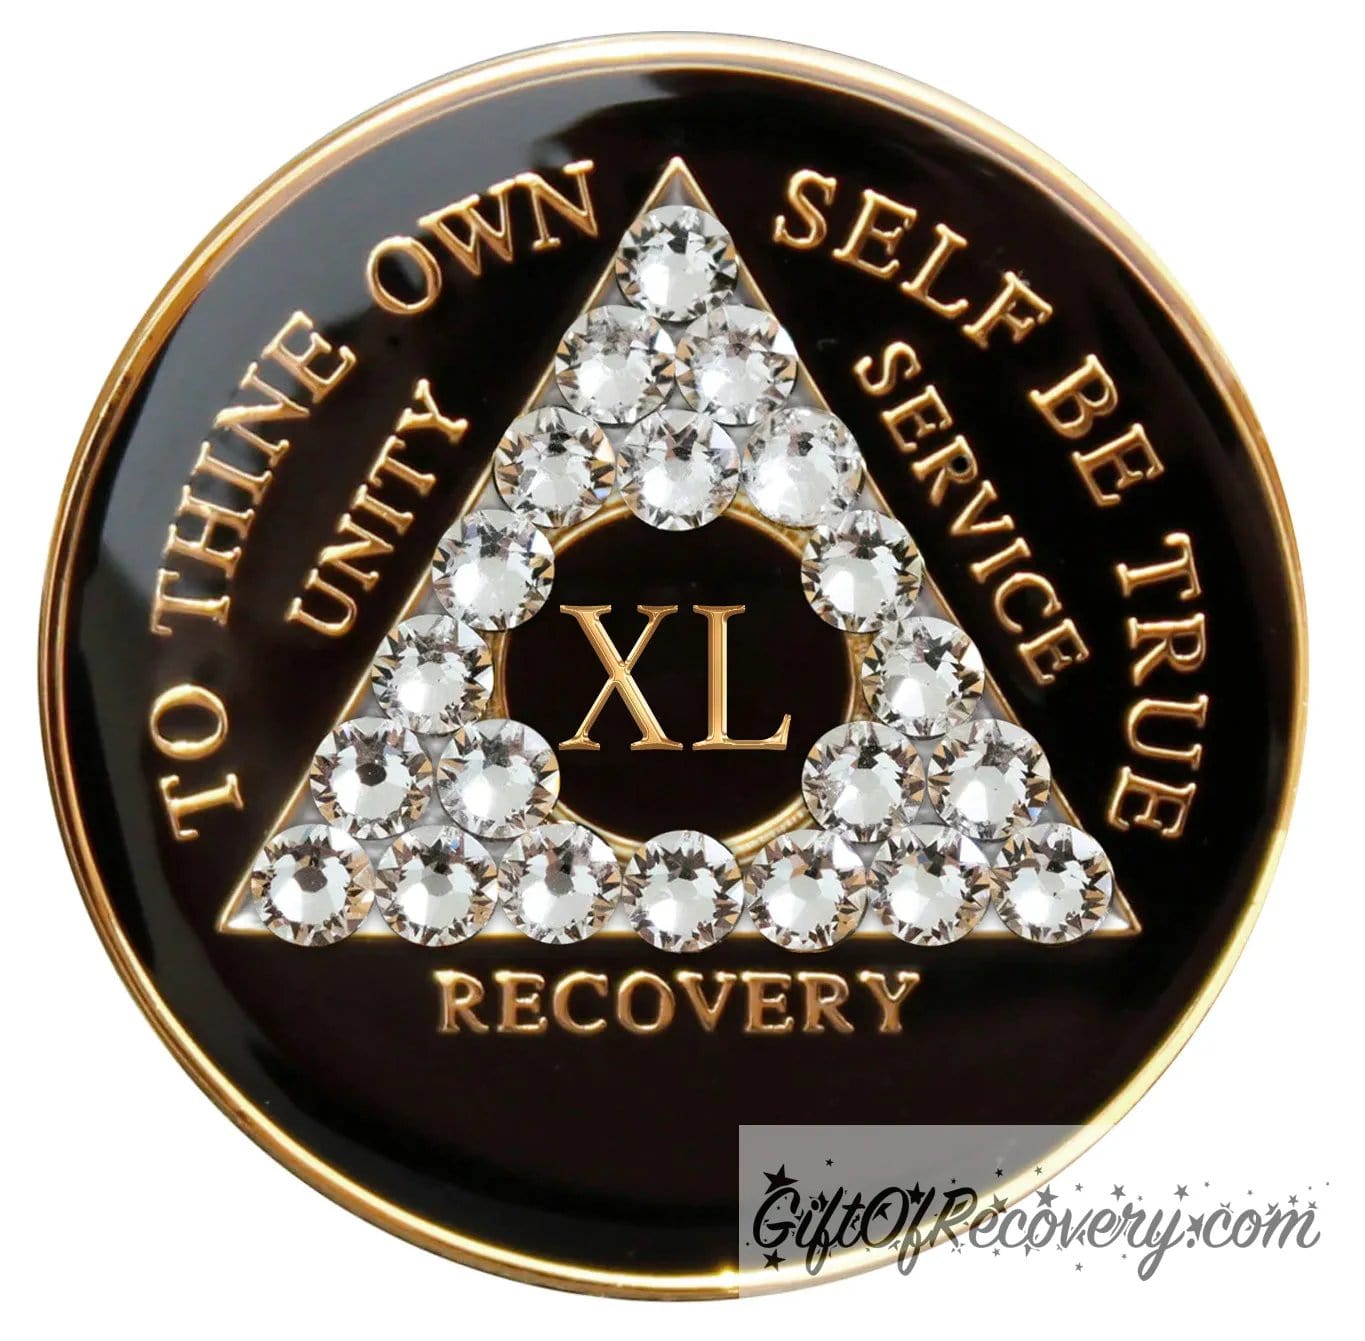 40 year AA medallion black onyx with 21 clear genuine crystals in the shape of the triangle, to thine own self be true, unity, service, recovery, and the roman numeral are embossed with 14k gold-plated brass, the recovery medallion is sealed with resin for a glossy finish that will last and is scratch proof.